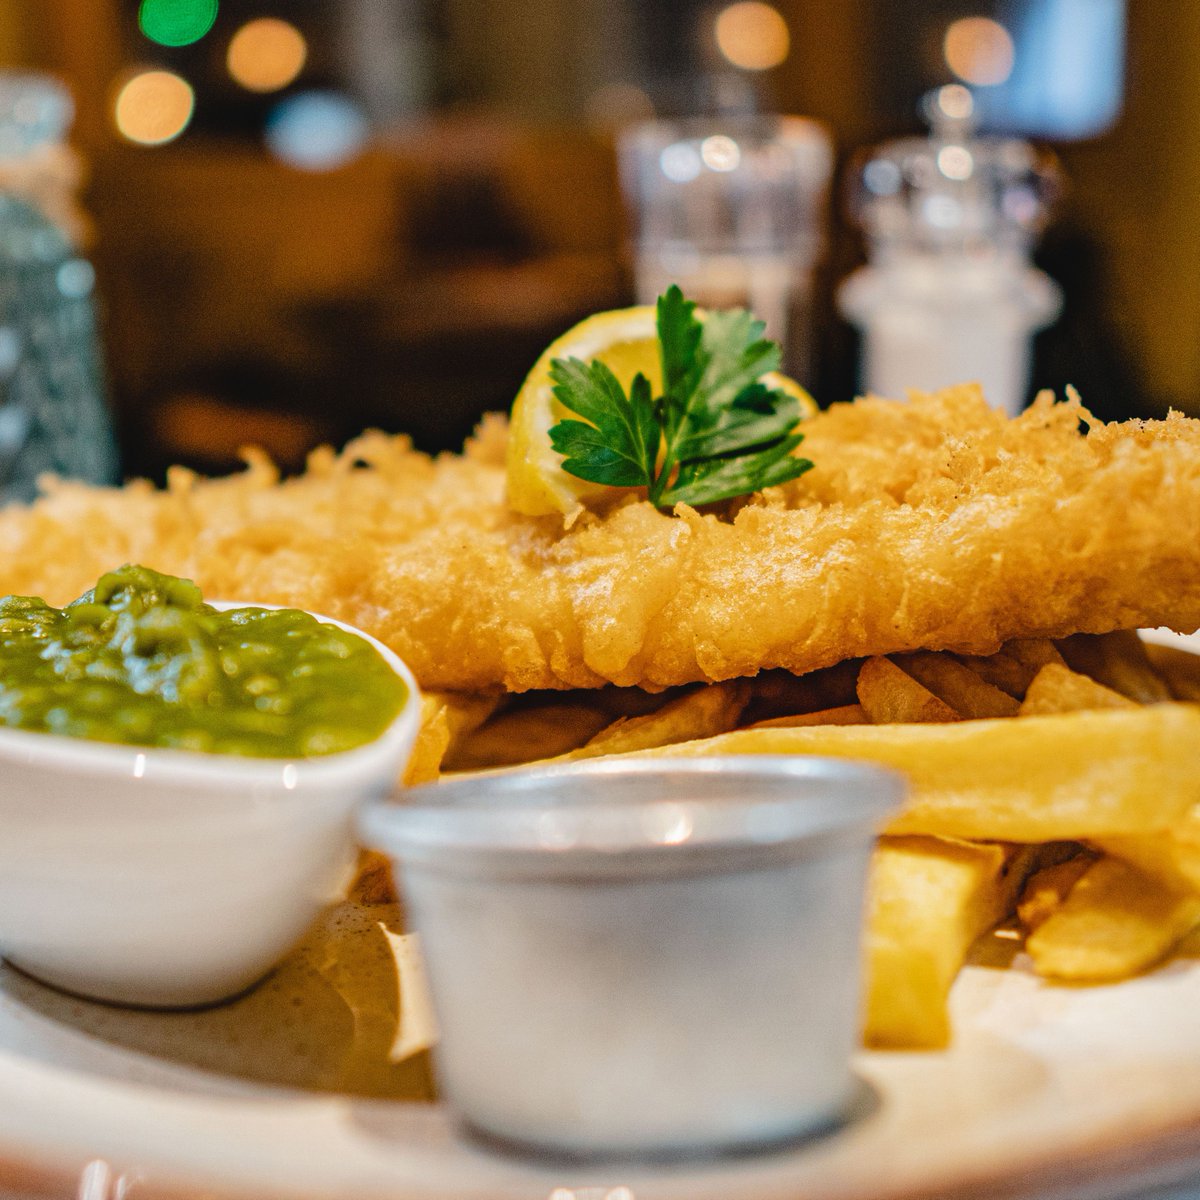 Some say Fish & Chips are the same wherever you go. But at George's, we beg to differ. If you haven't tried our speciality yet then come and indulge in a mid-week treat. We'll even do the washing up! Book your table now - buff.ly/2N7mz65 #FishAndChips